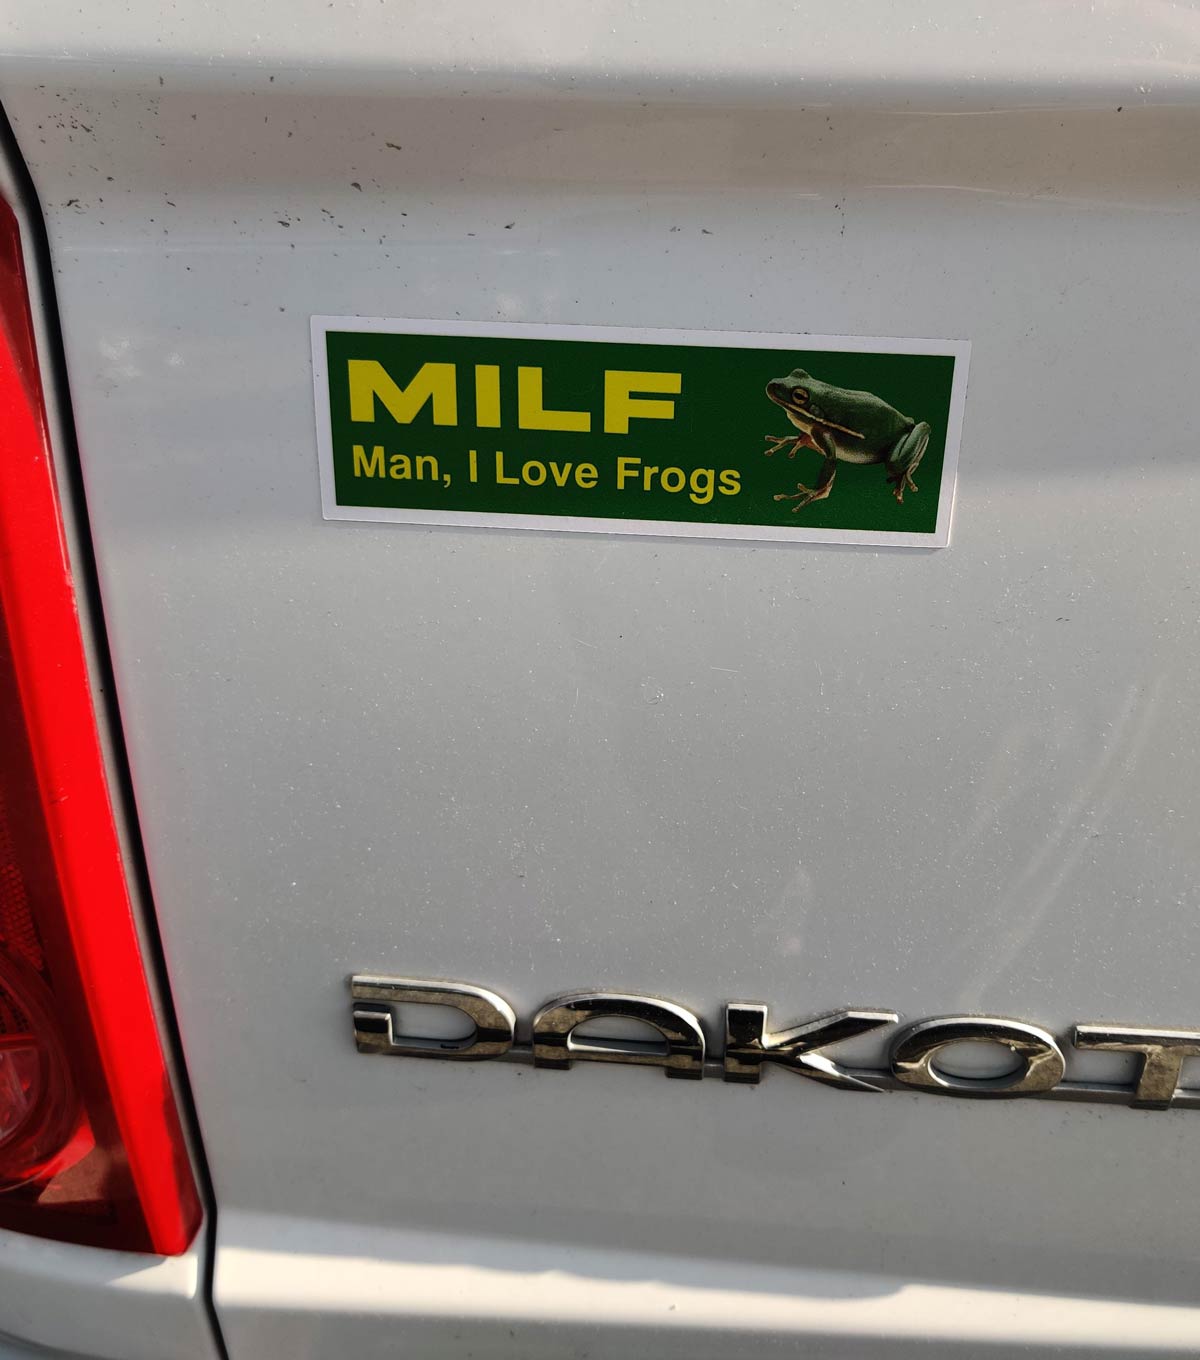 I guess the man loves frogs